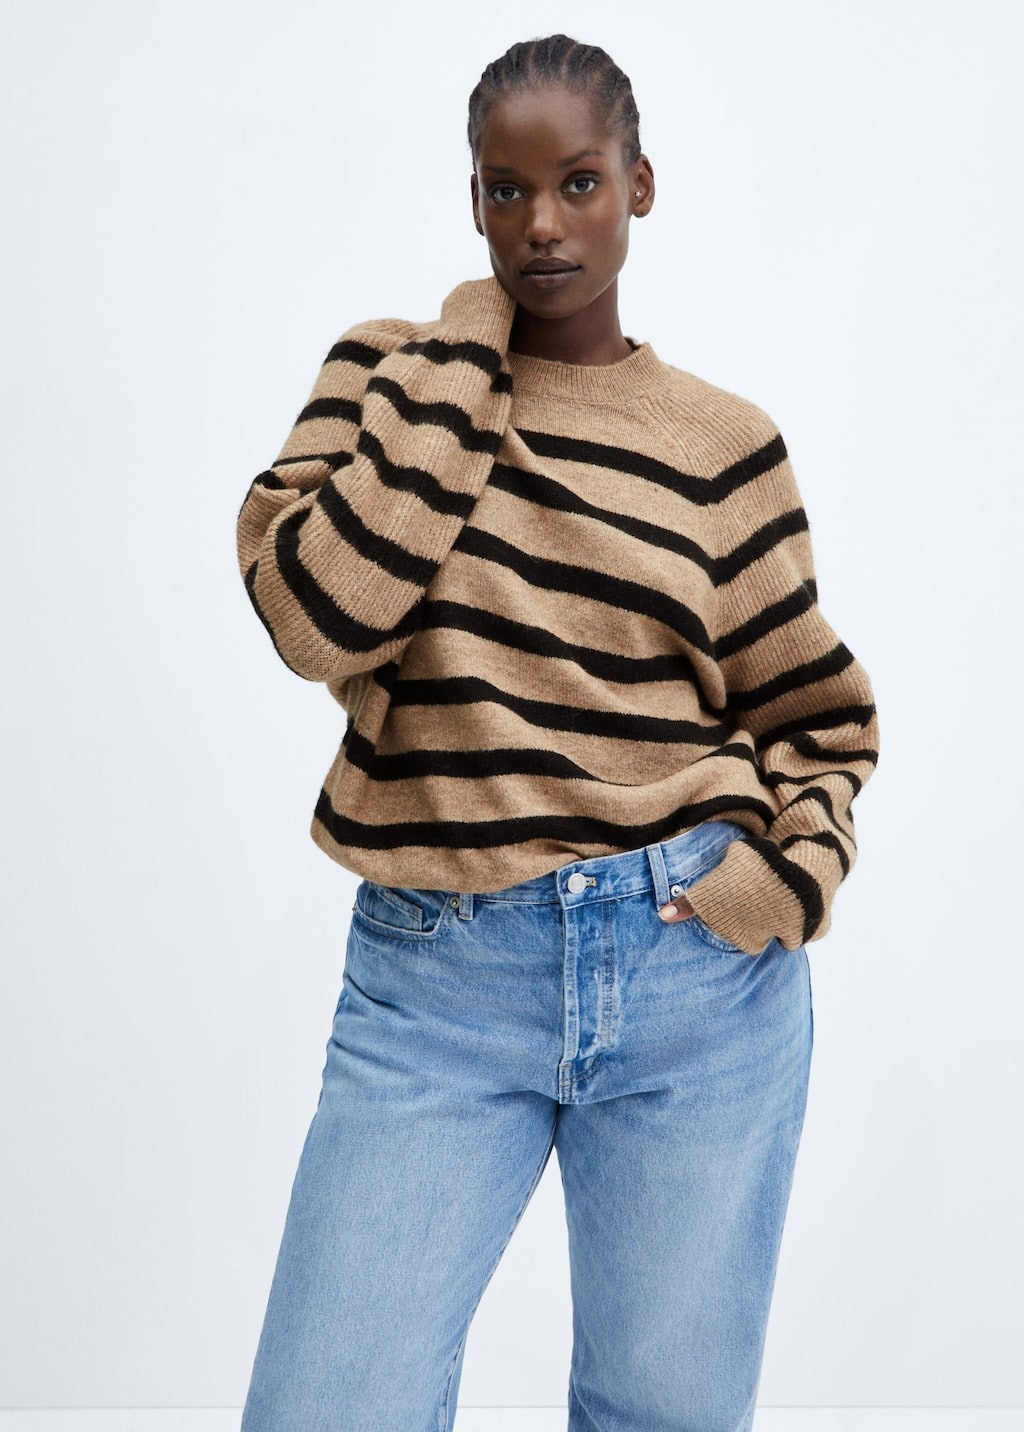 Early Black Friday Sweater and Jacket Deals From Mango | Who What Wear